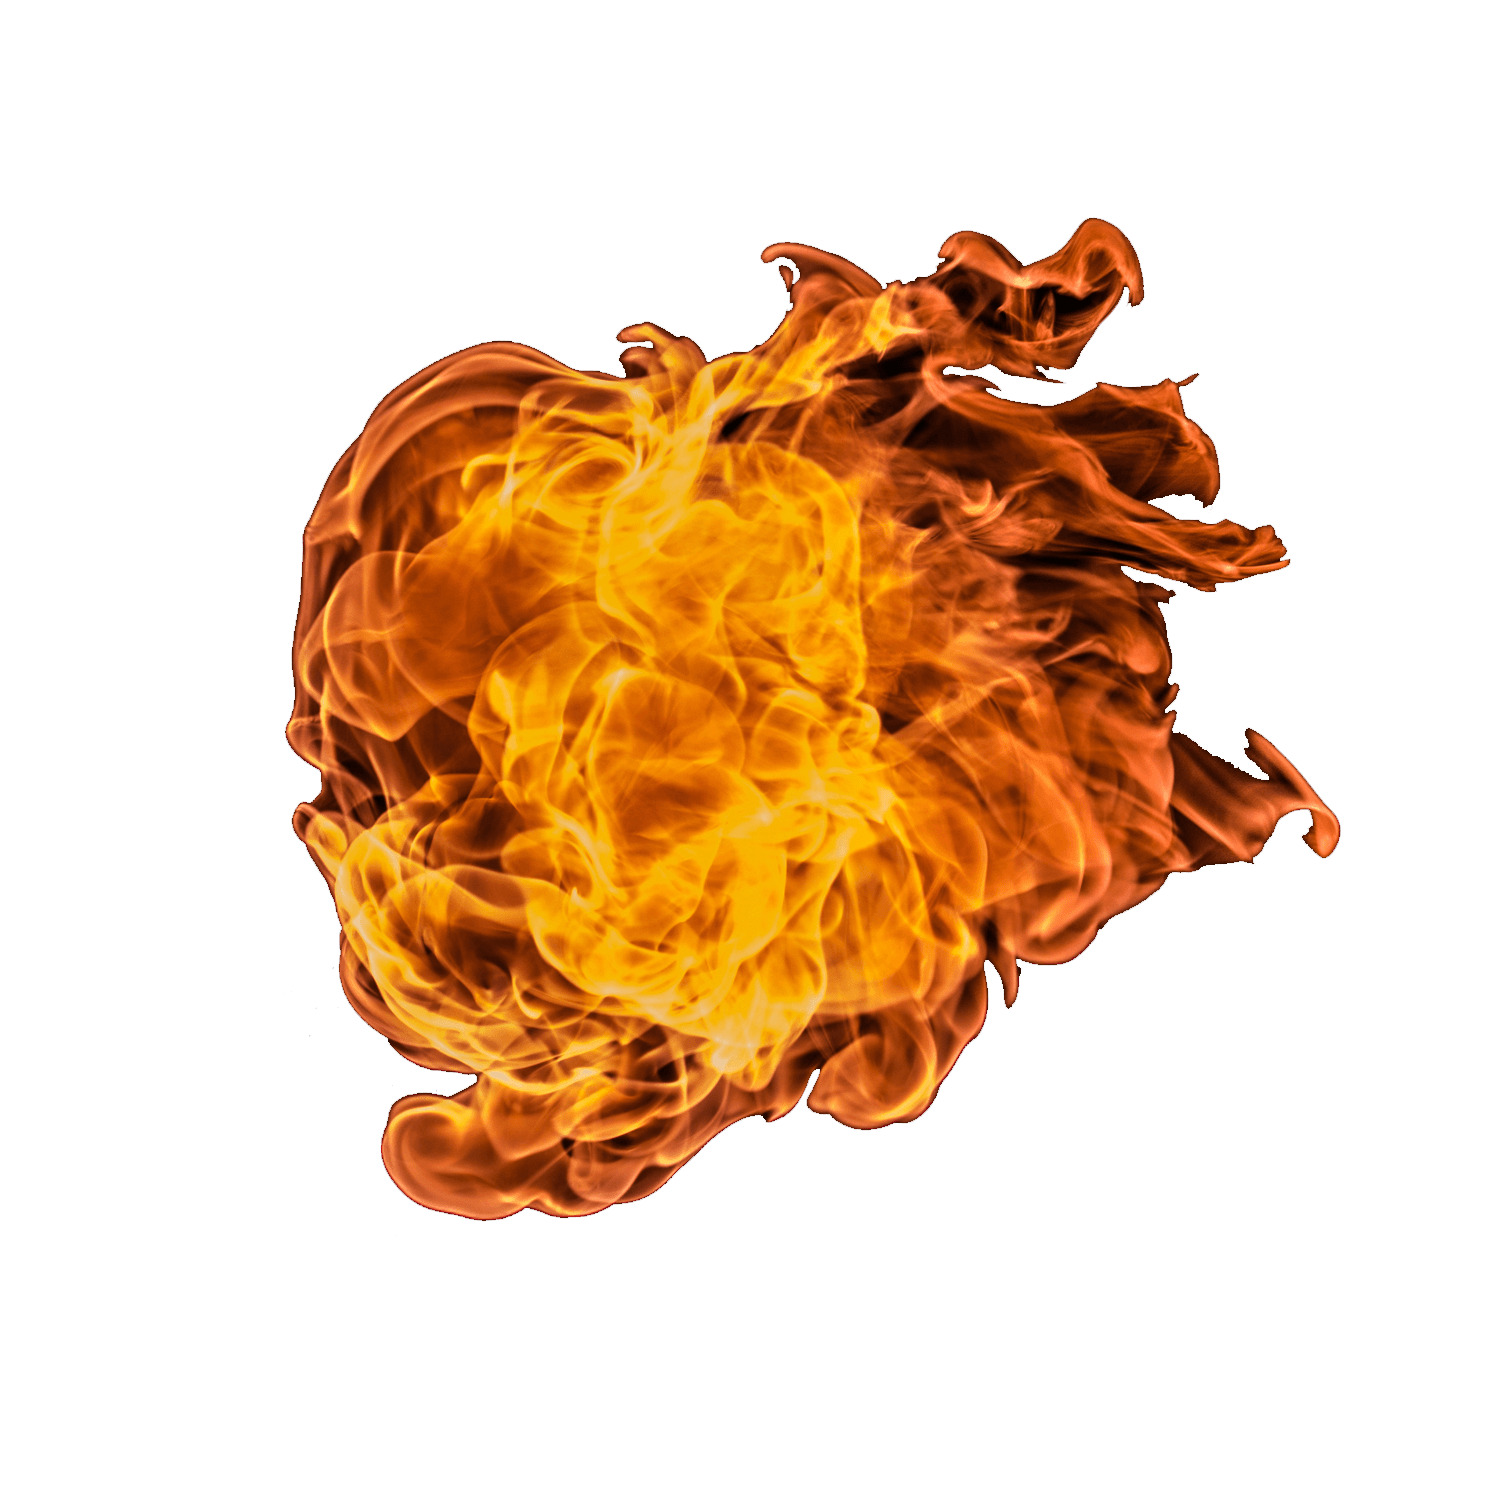 Huge Ball Of Fire png